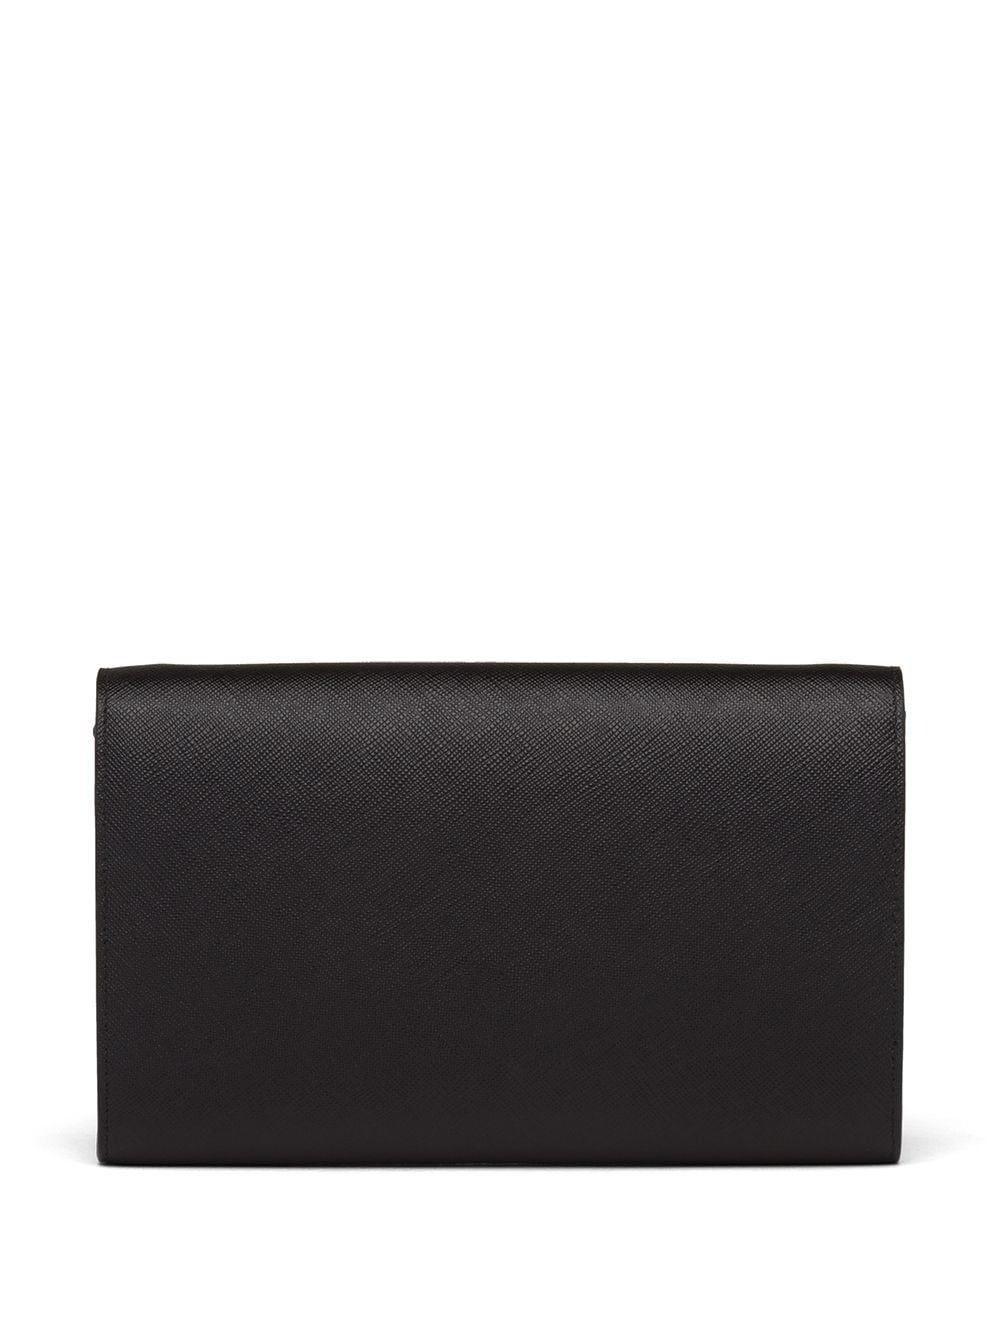 prada saffiano and leather wallet with shoulder strap｜TikTok Search